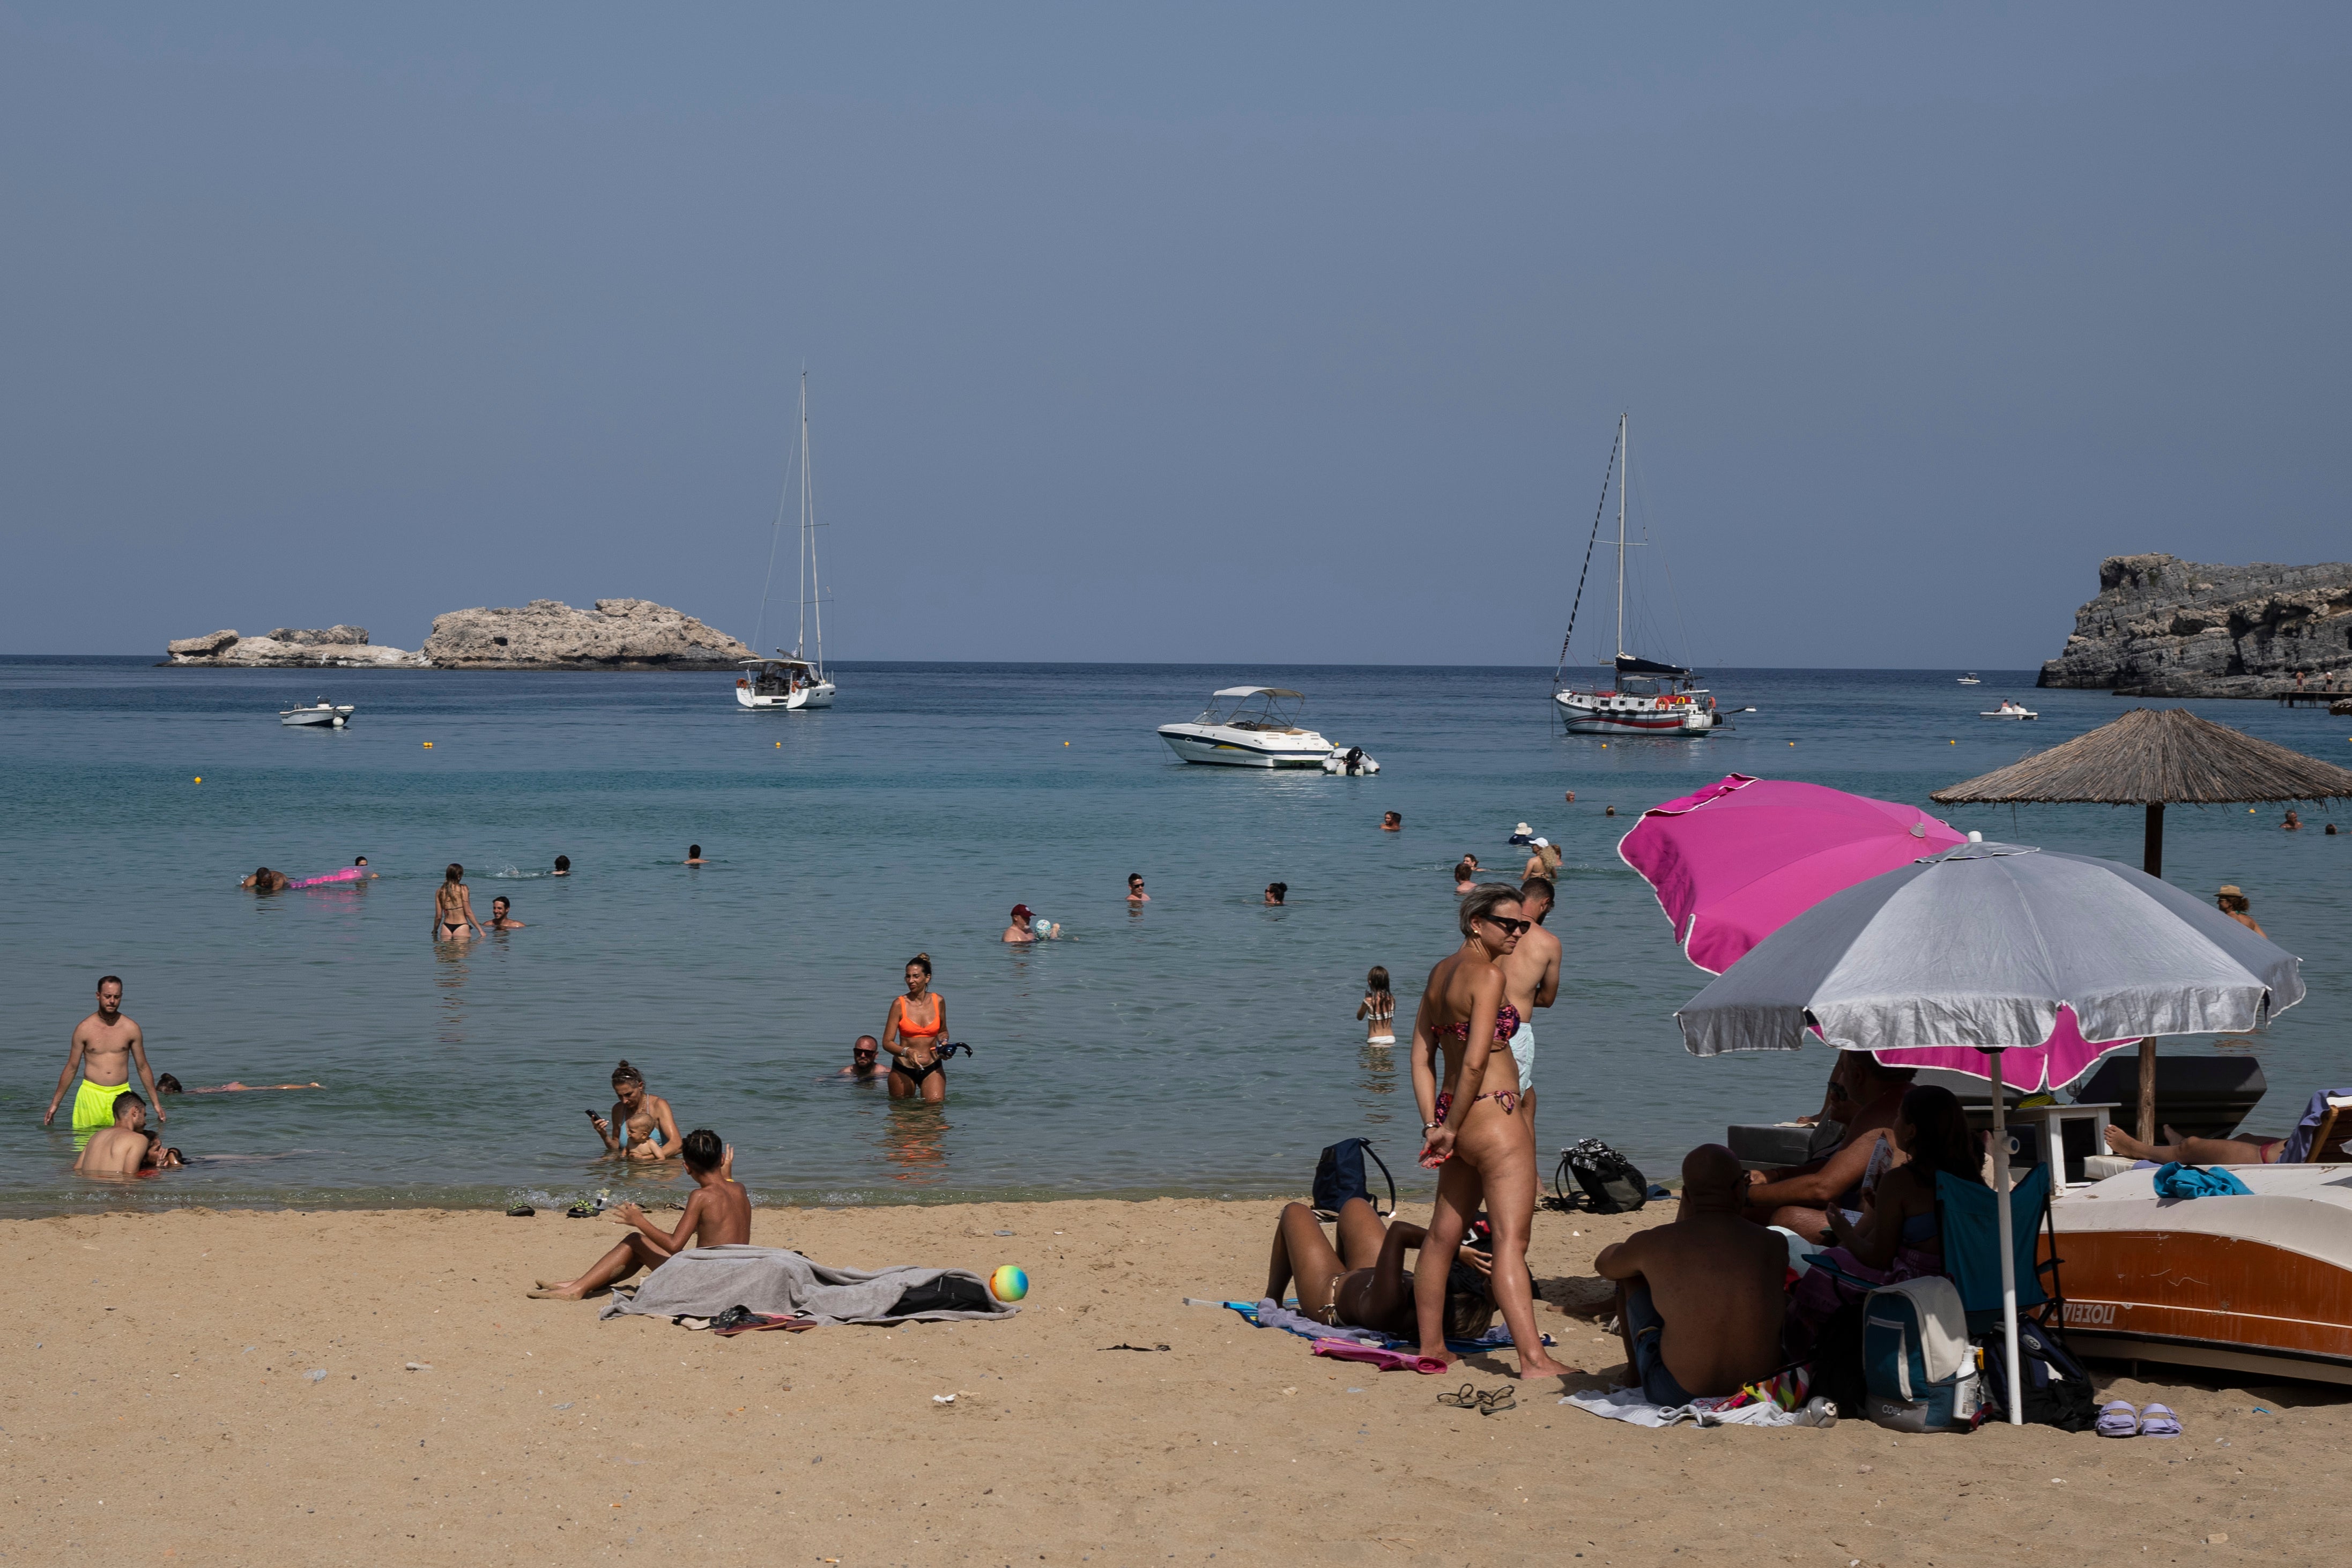 ourists enjoy the beach and the sea in Lindos, on the Aegean Sea island of Rhodes, southeastern Greece